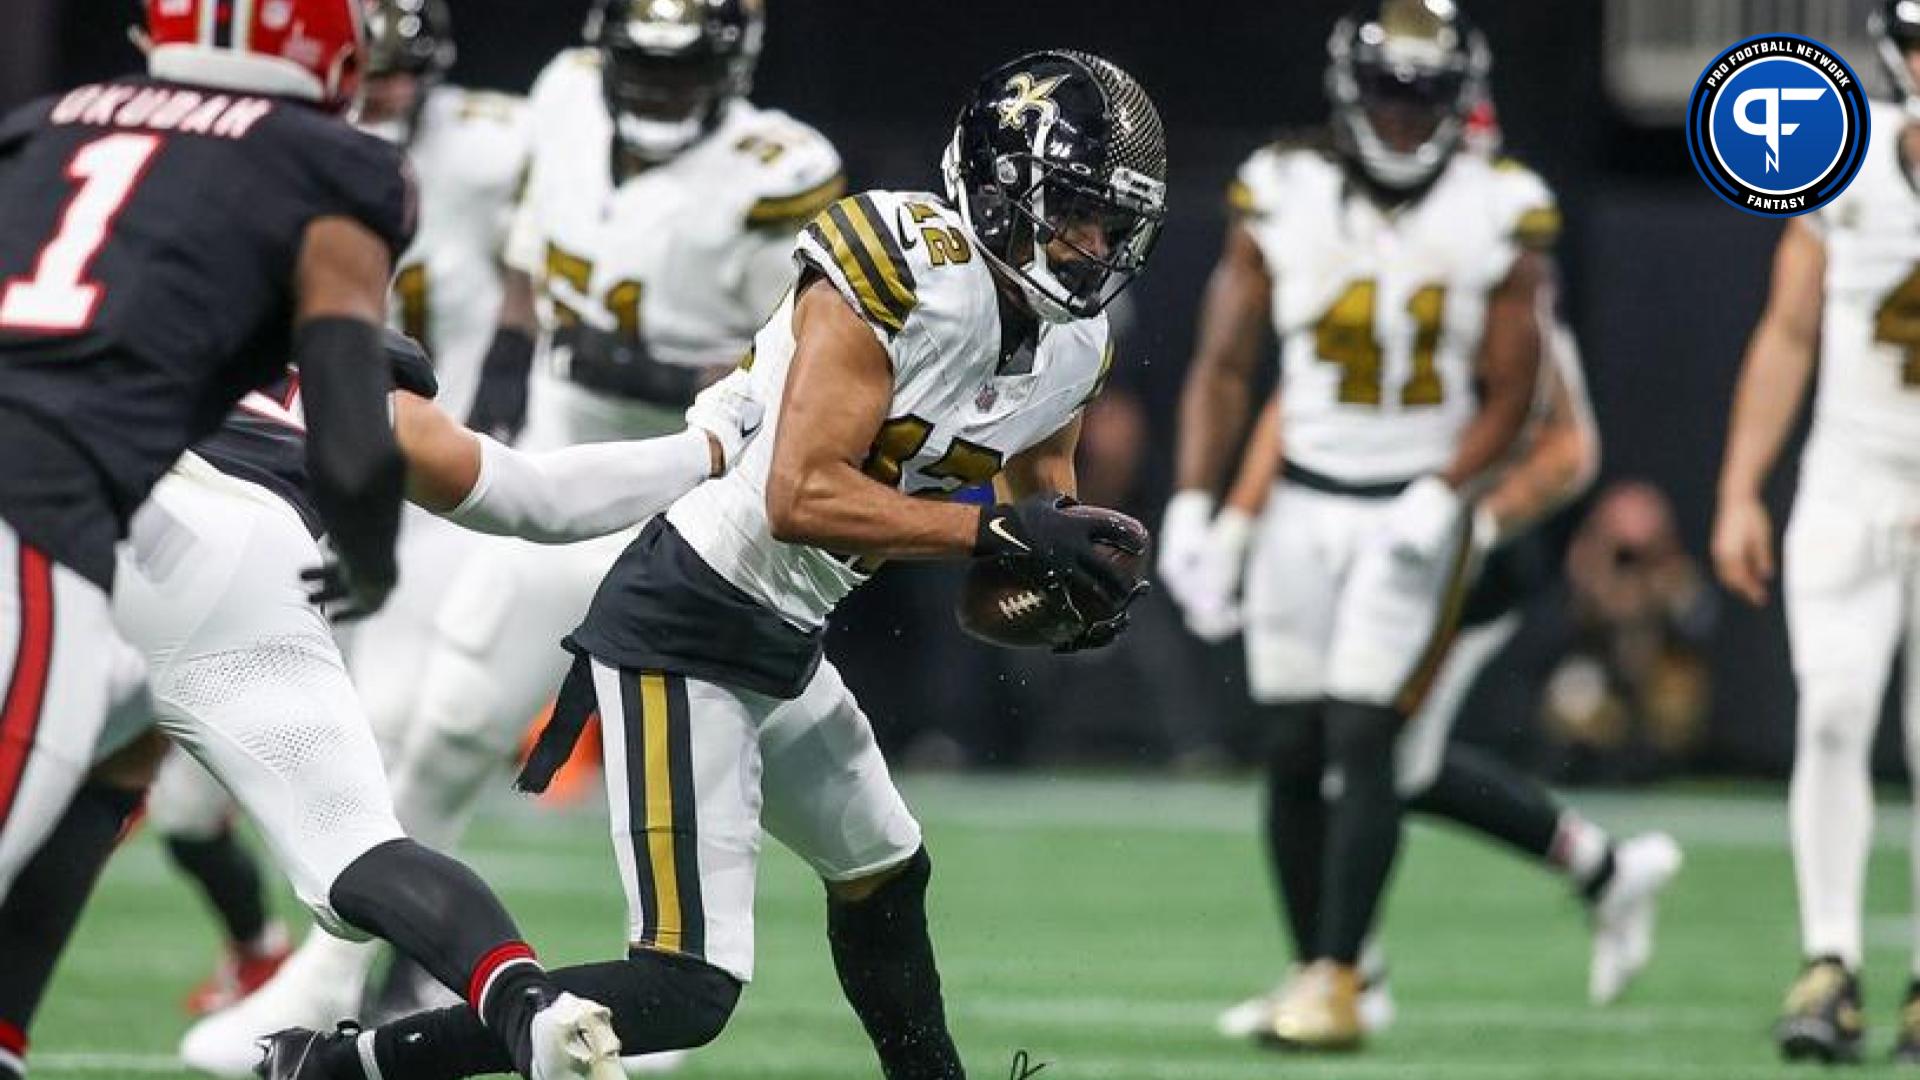 Chris Olave (12) runs after a catch against the Atlanta Falcons in the second quarter at Mercedes-Benz Stadium.